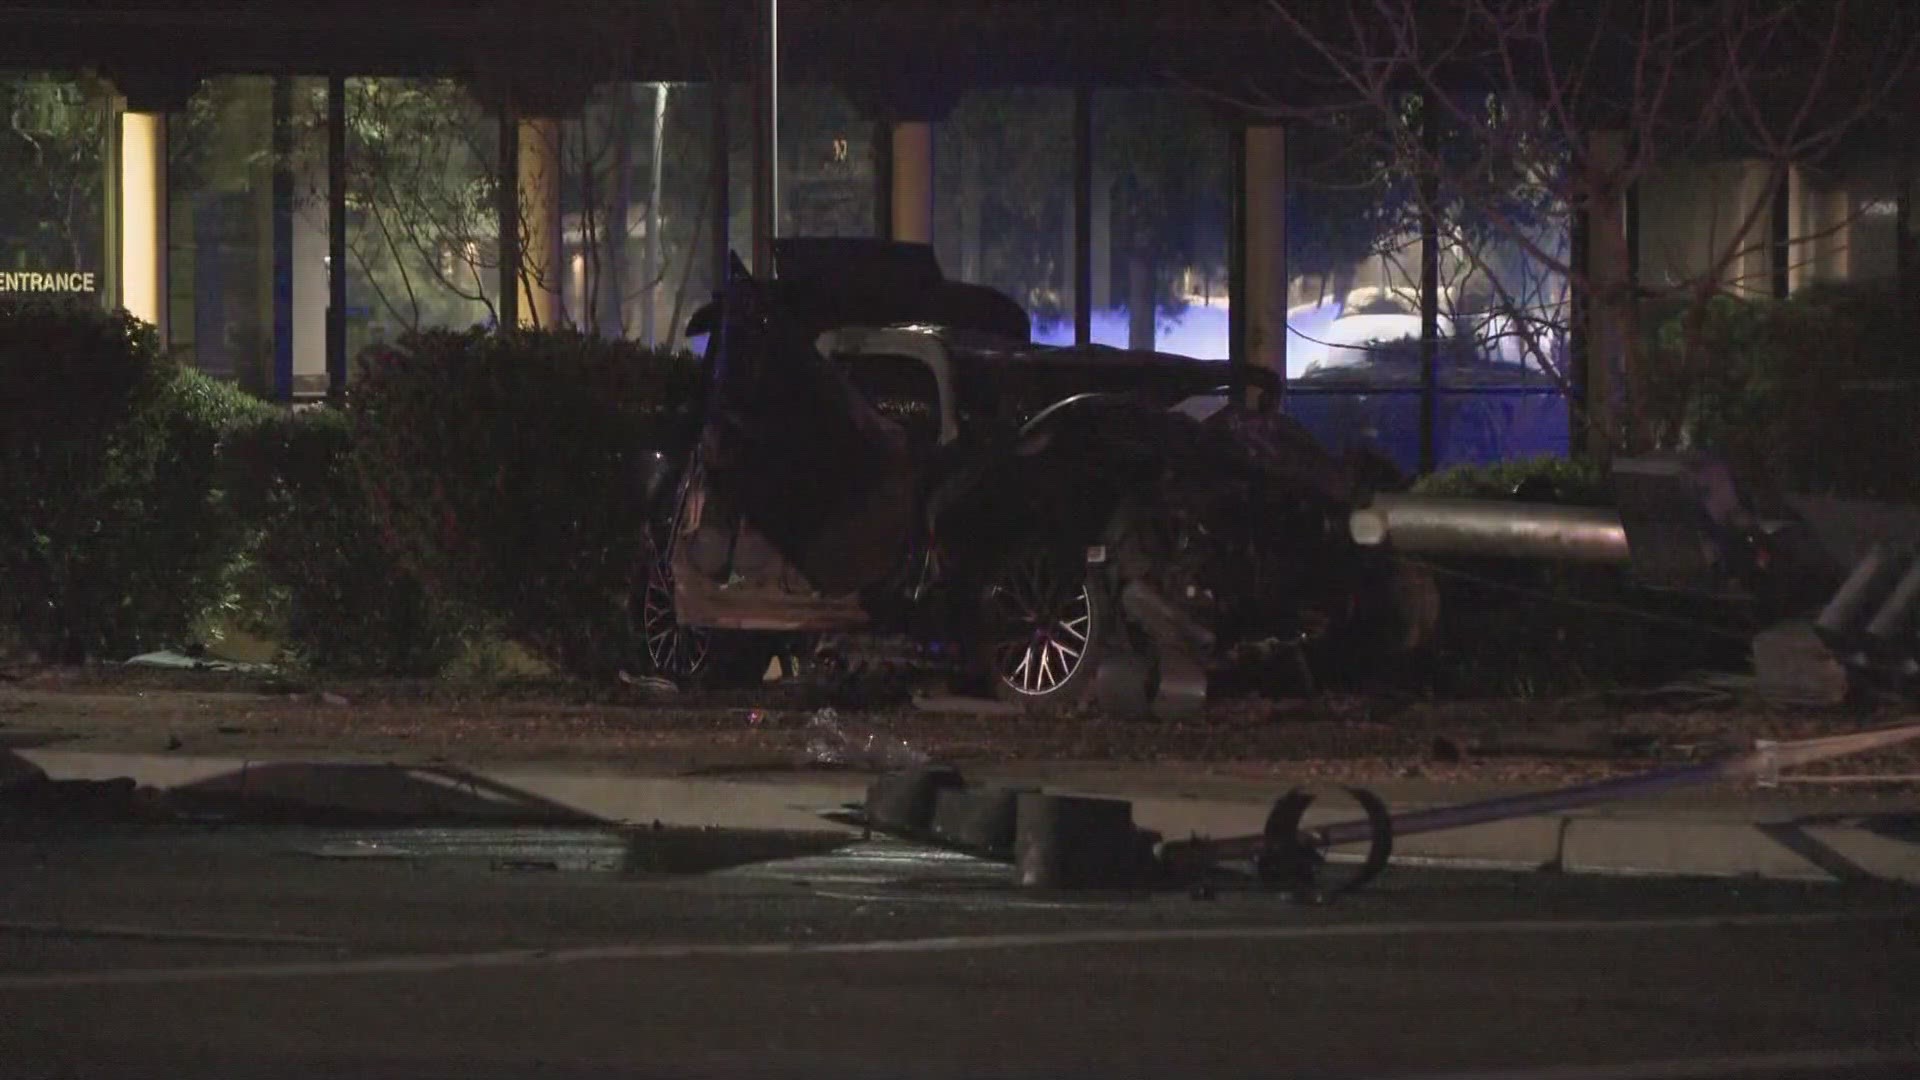 A person has died following a crash in Tempe Sunday evening.